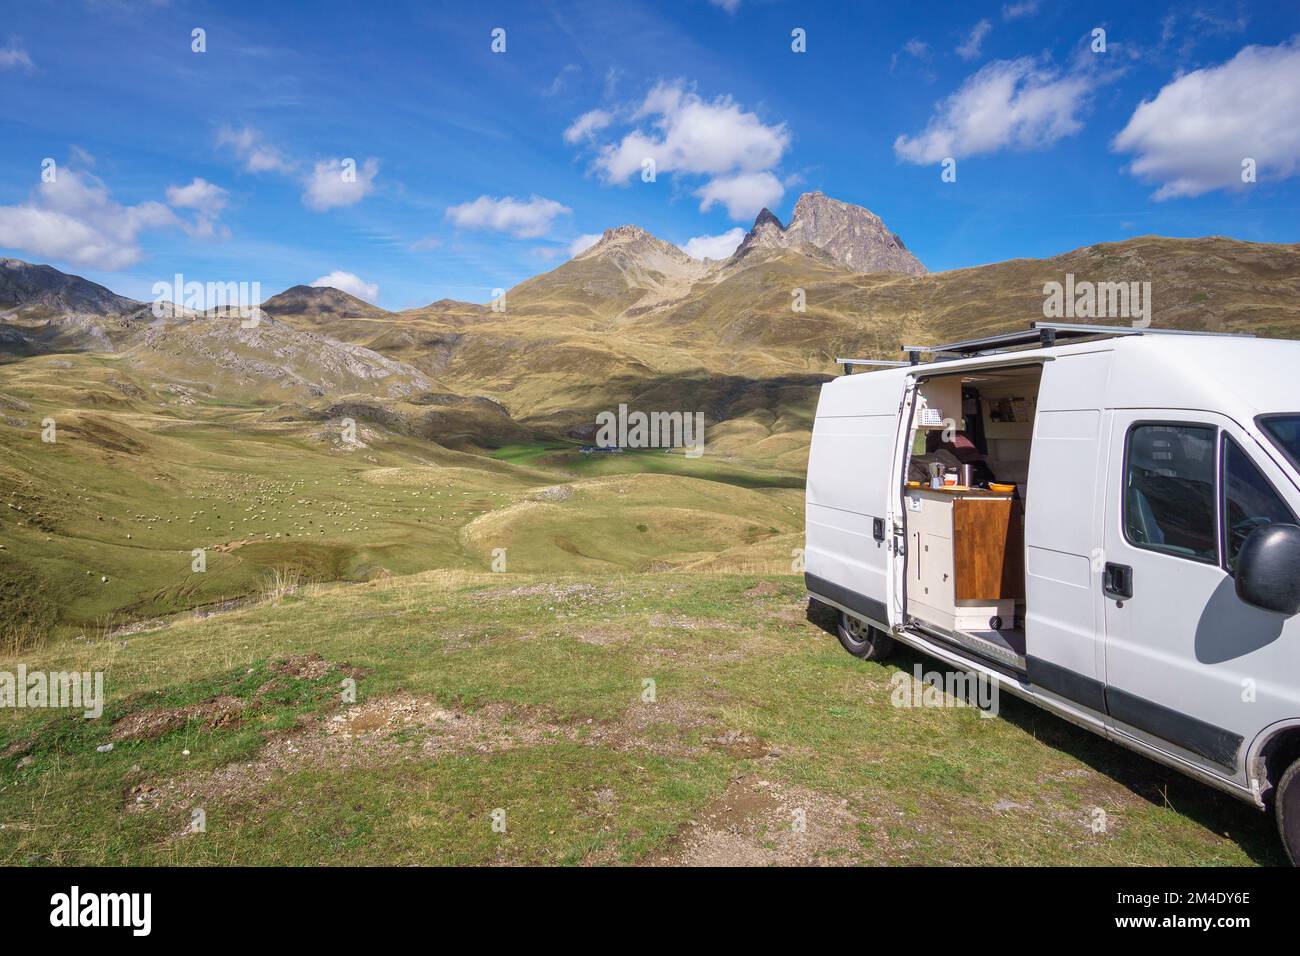 Motorhome in front of rock scenery, Devils Garden Campground, Arches  National Park, Moab, Utah, USA, North America Stock Photo - Alamy